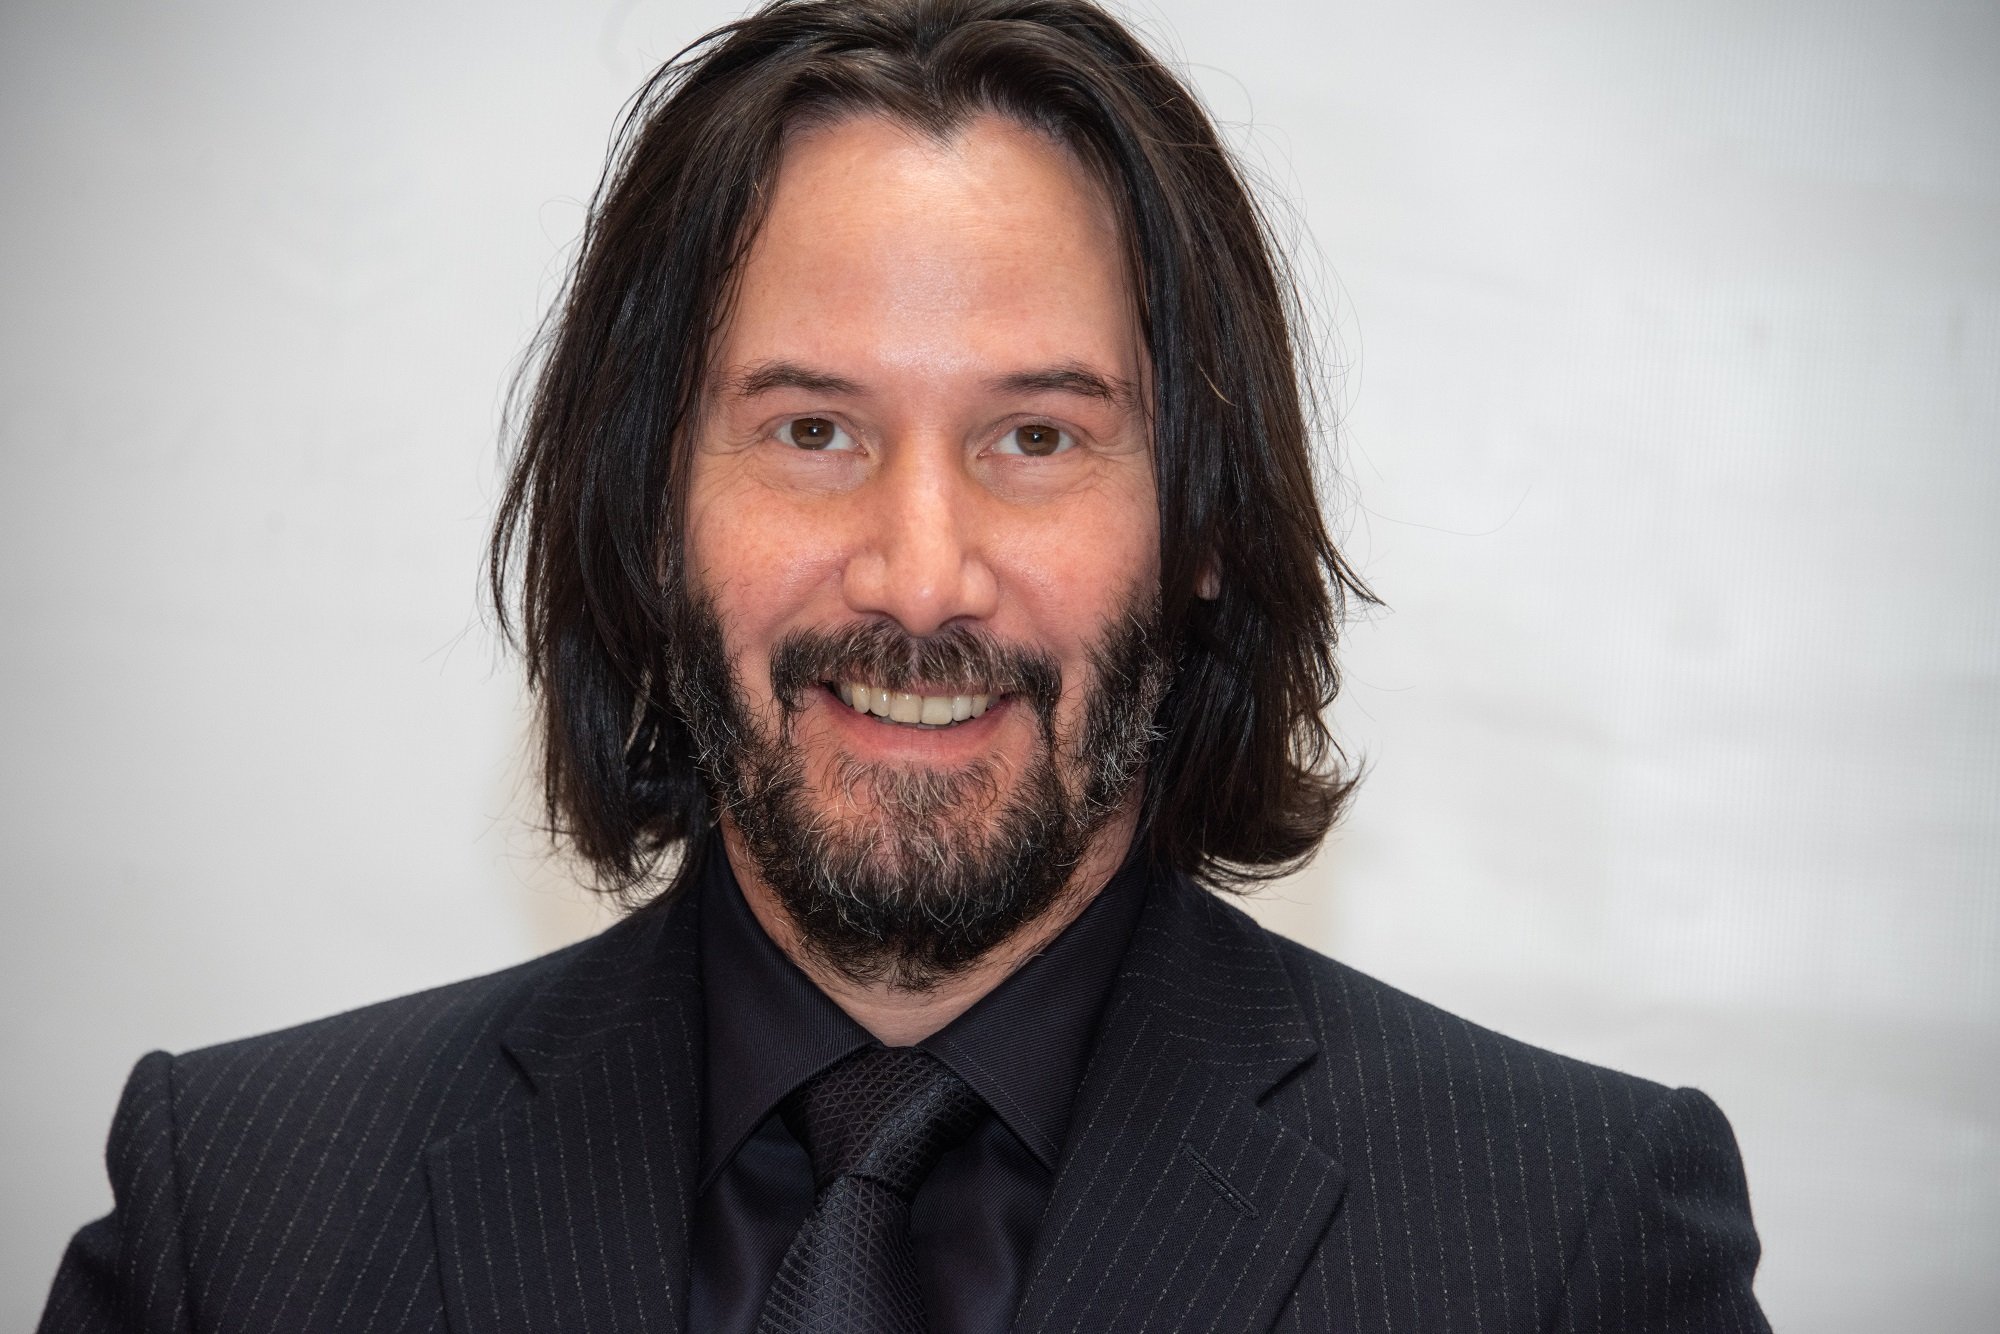 What High School Did Keanu Reeves Go To?